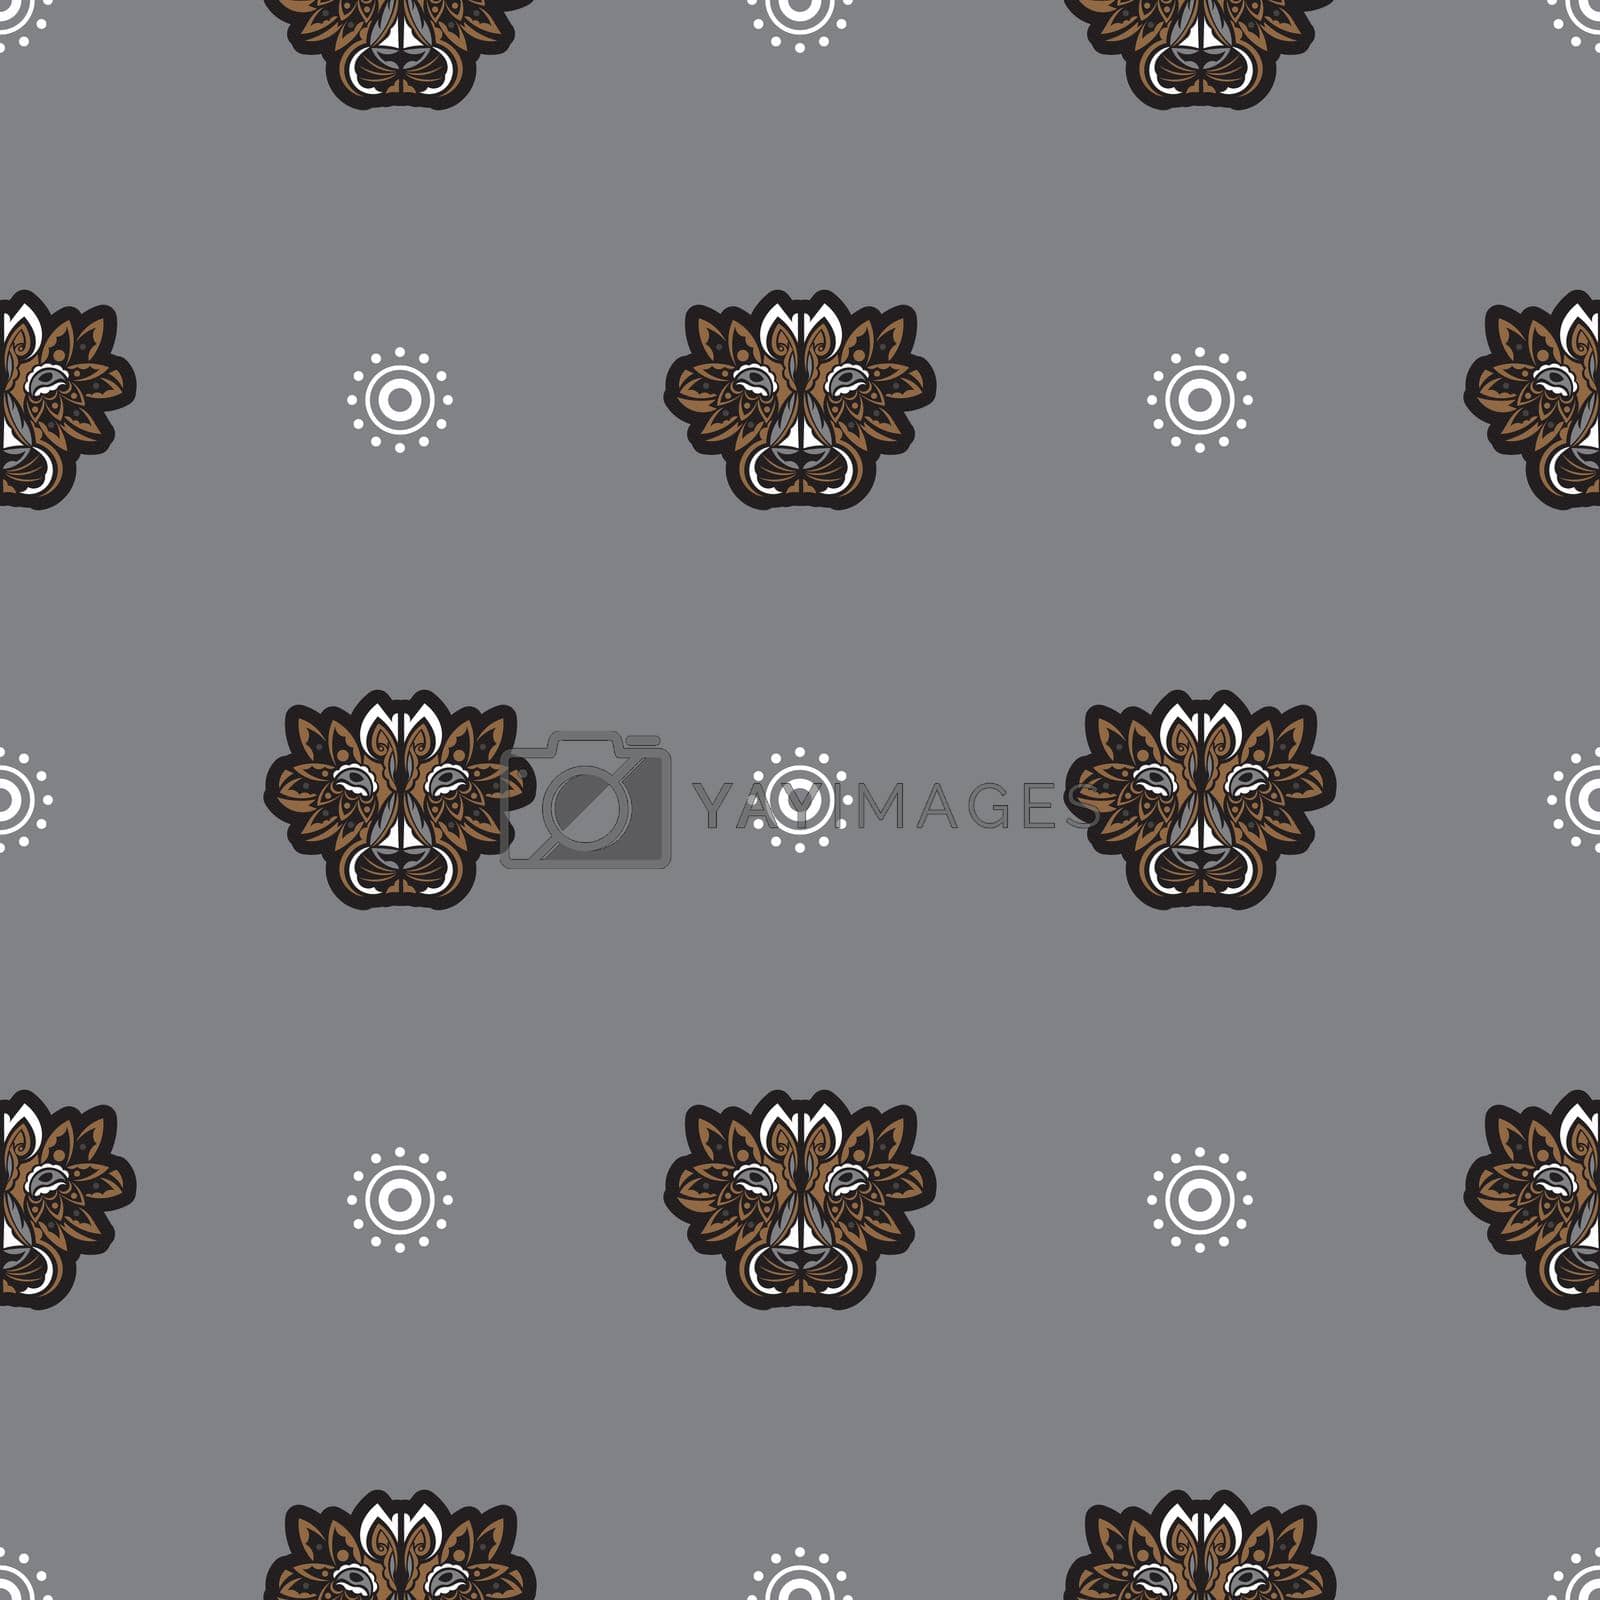 Seamless pattern with tiger head in simple boho style. Good for backgrounds and prints. Vector illustration.